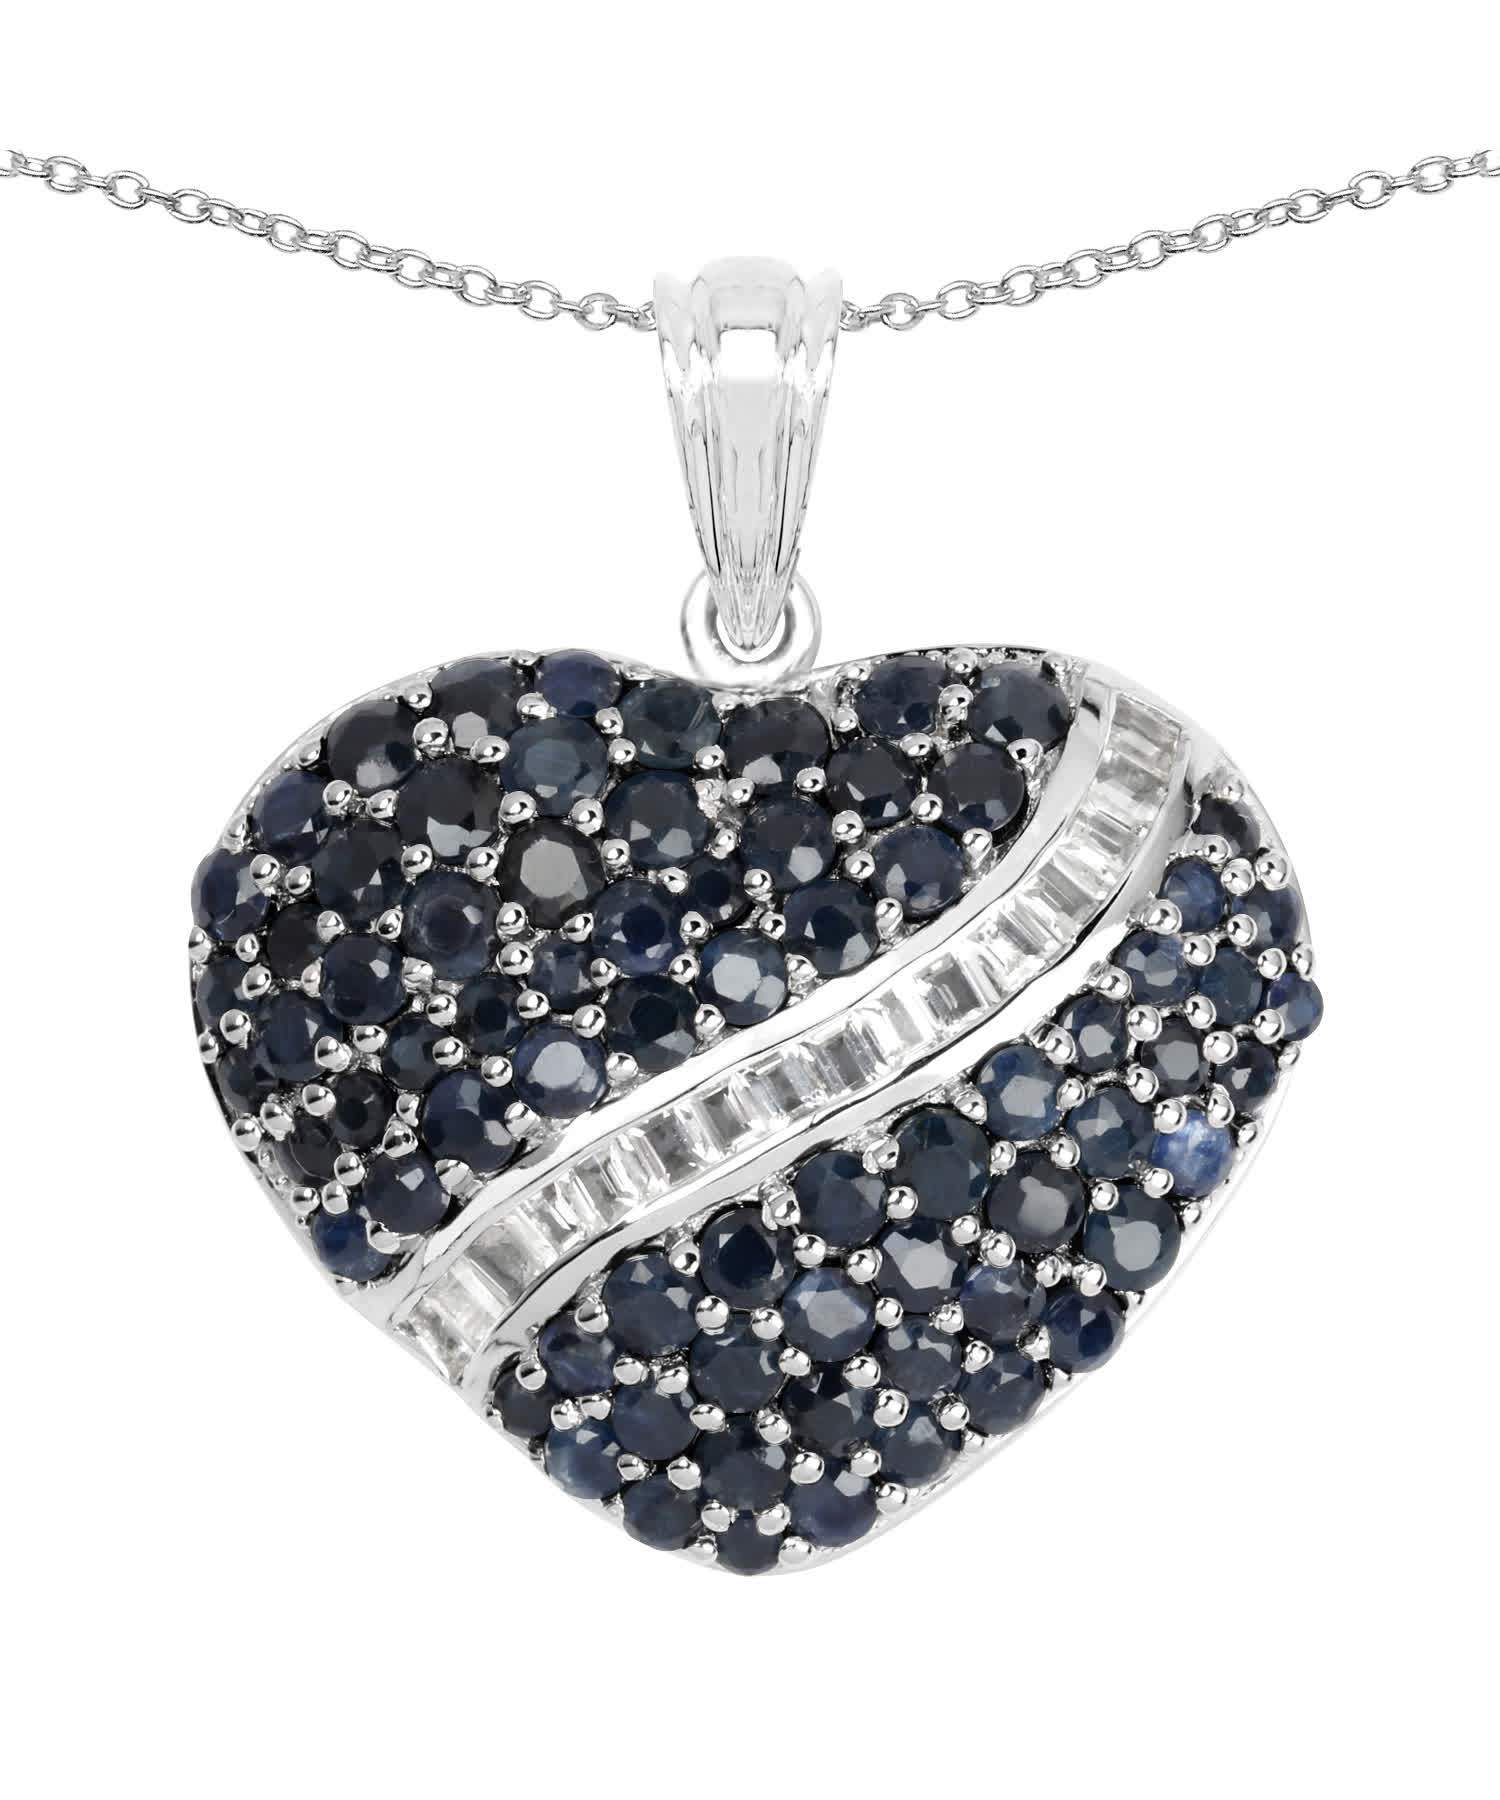 4.67ctw Natural Midnight Blue Sapphire and White Topaz Rhodium Plated 925 Sterling Silver Heart Pendant With Chain View 1